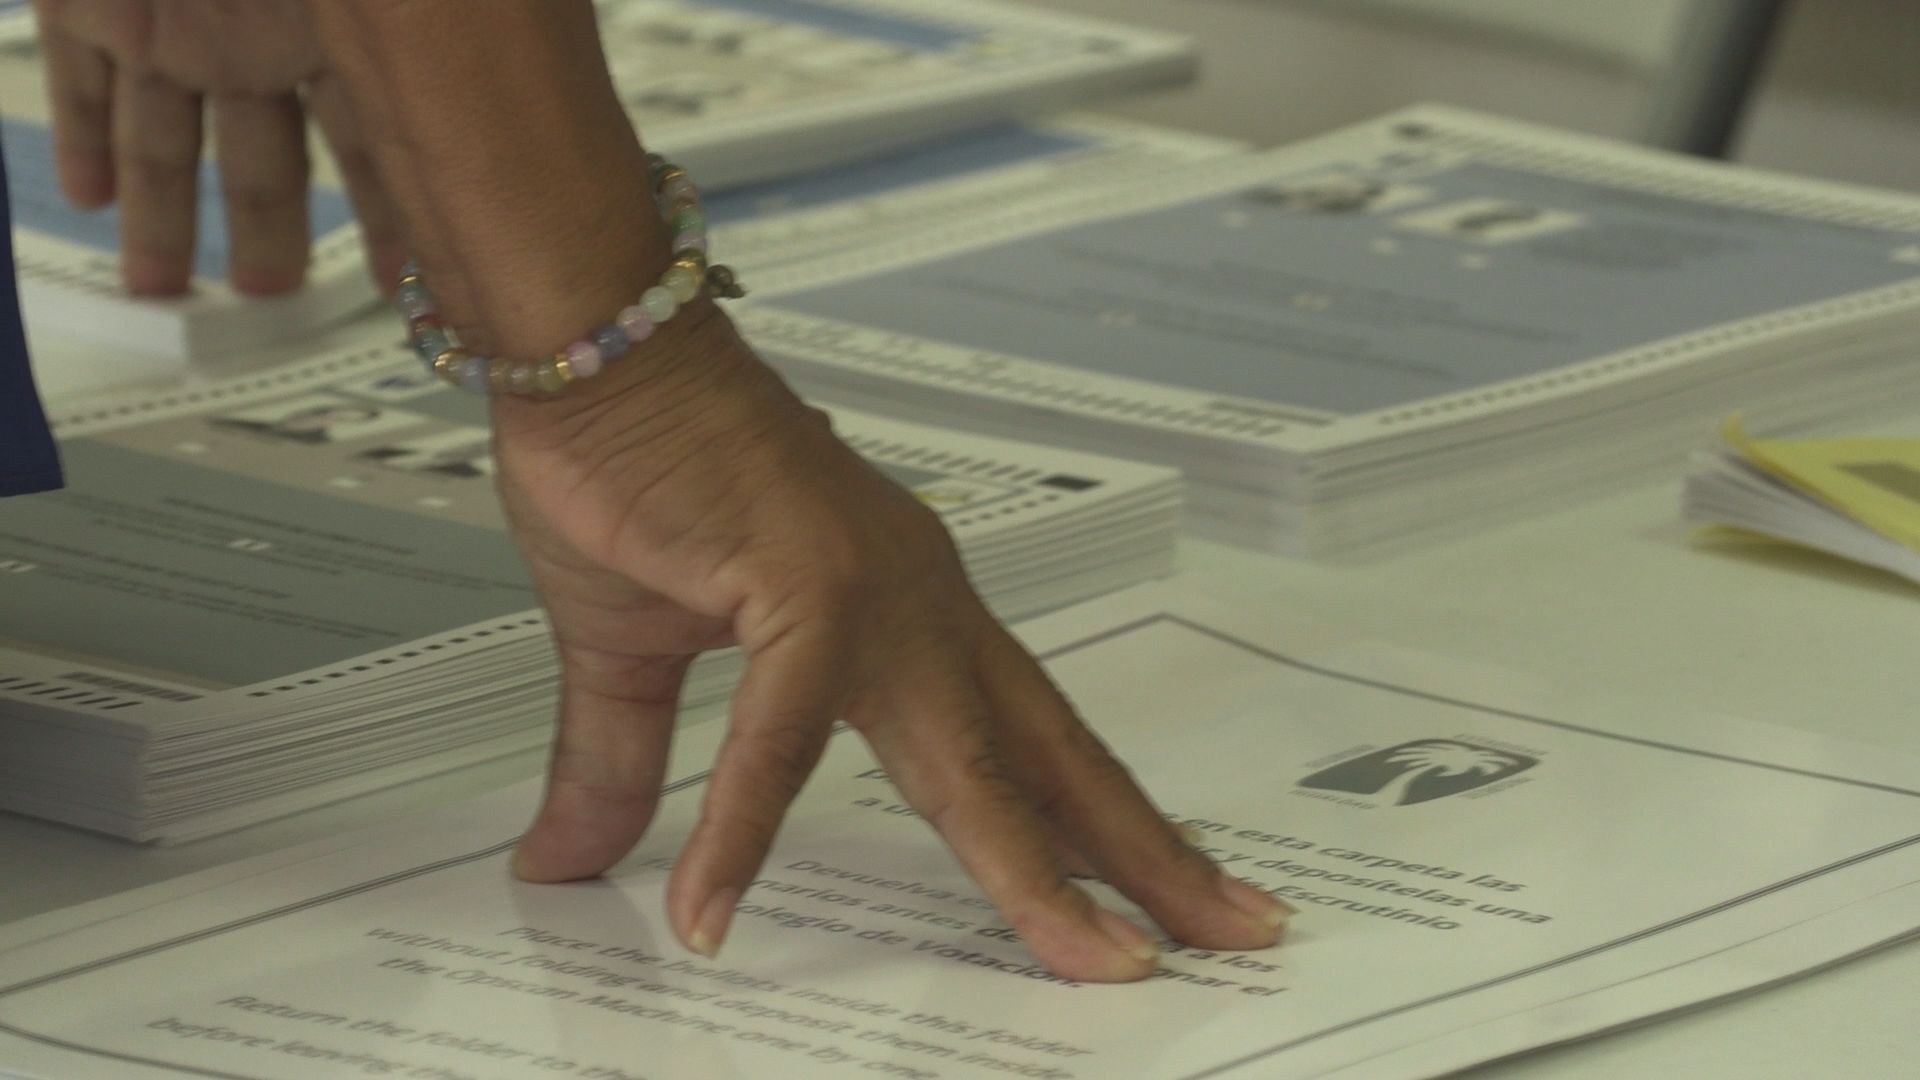 Puerto Rico Primaries: Historically, Puerto Ricans Have Low Voter Turnout